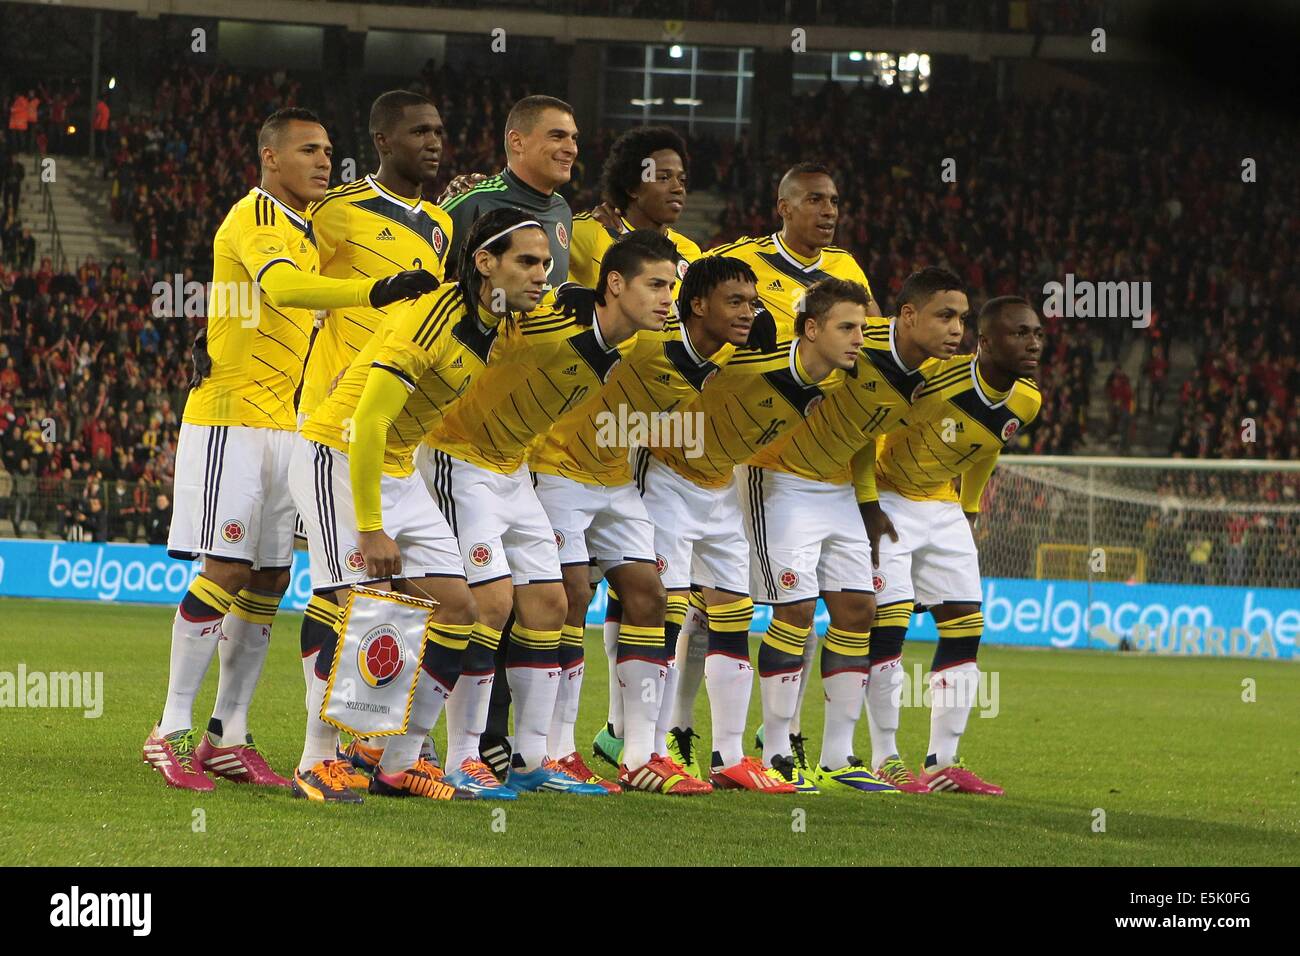 Brussels, Belgium. 14th Nov, 2013. Colombia team group line-up (COL) Football/Soccer : Colombia team group shot (Top row - L to R) Aldo Ramirez, Christian Zapata, Faryd Mondragon, Carlos Sanchez, Luis Perea, (Bottom row - L to R) Radamel Falcao, James Rodriguez, Juan Guillermo Cuadrado, Santiago Arias, Luis Muriel and Pablo Armero before the international friendly match between Belgium 0-2 Colombia at Stade Roi Baudouin in Brussels, Belgium . © AFLO/Alamy Live News Stock Photo